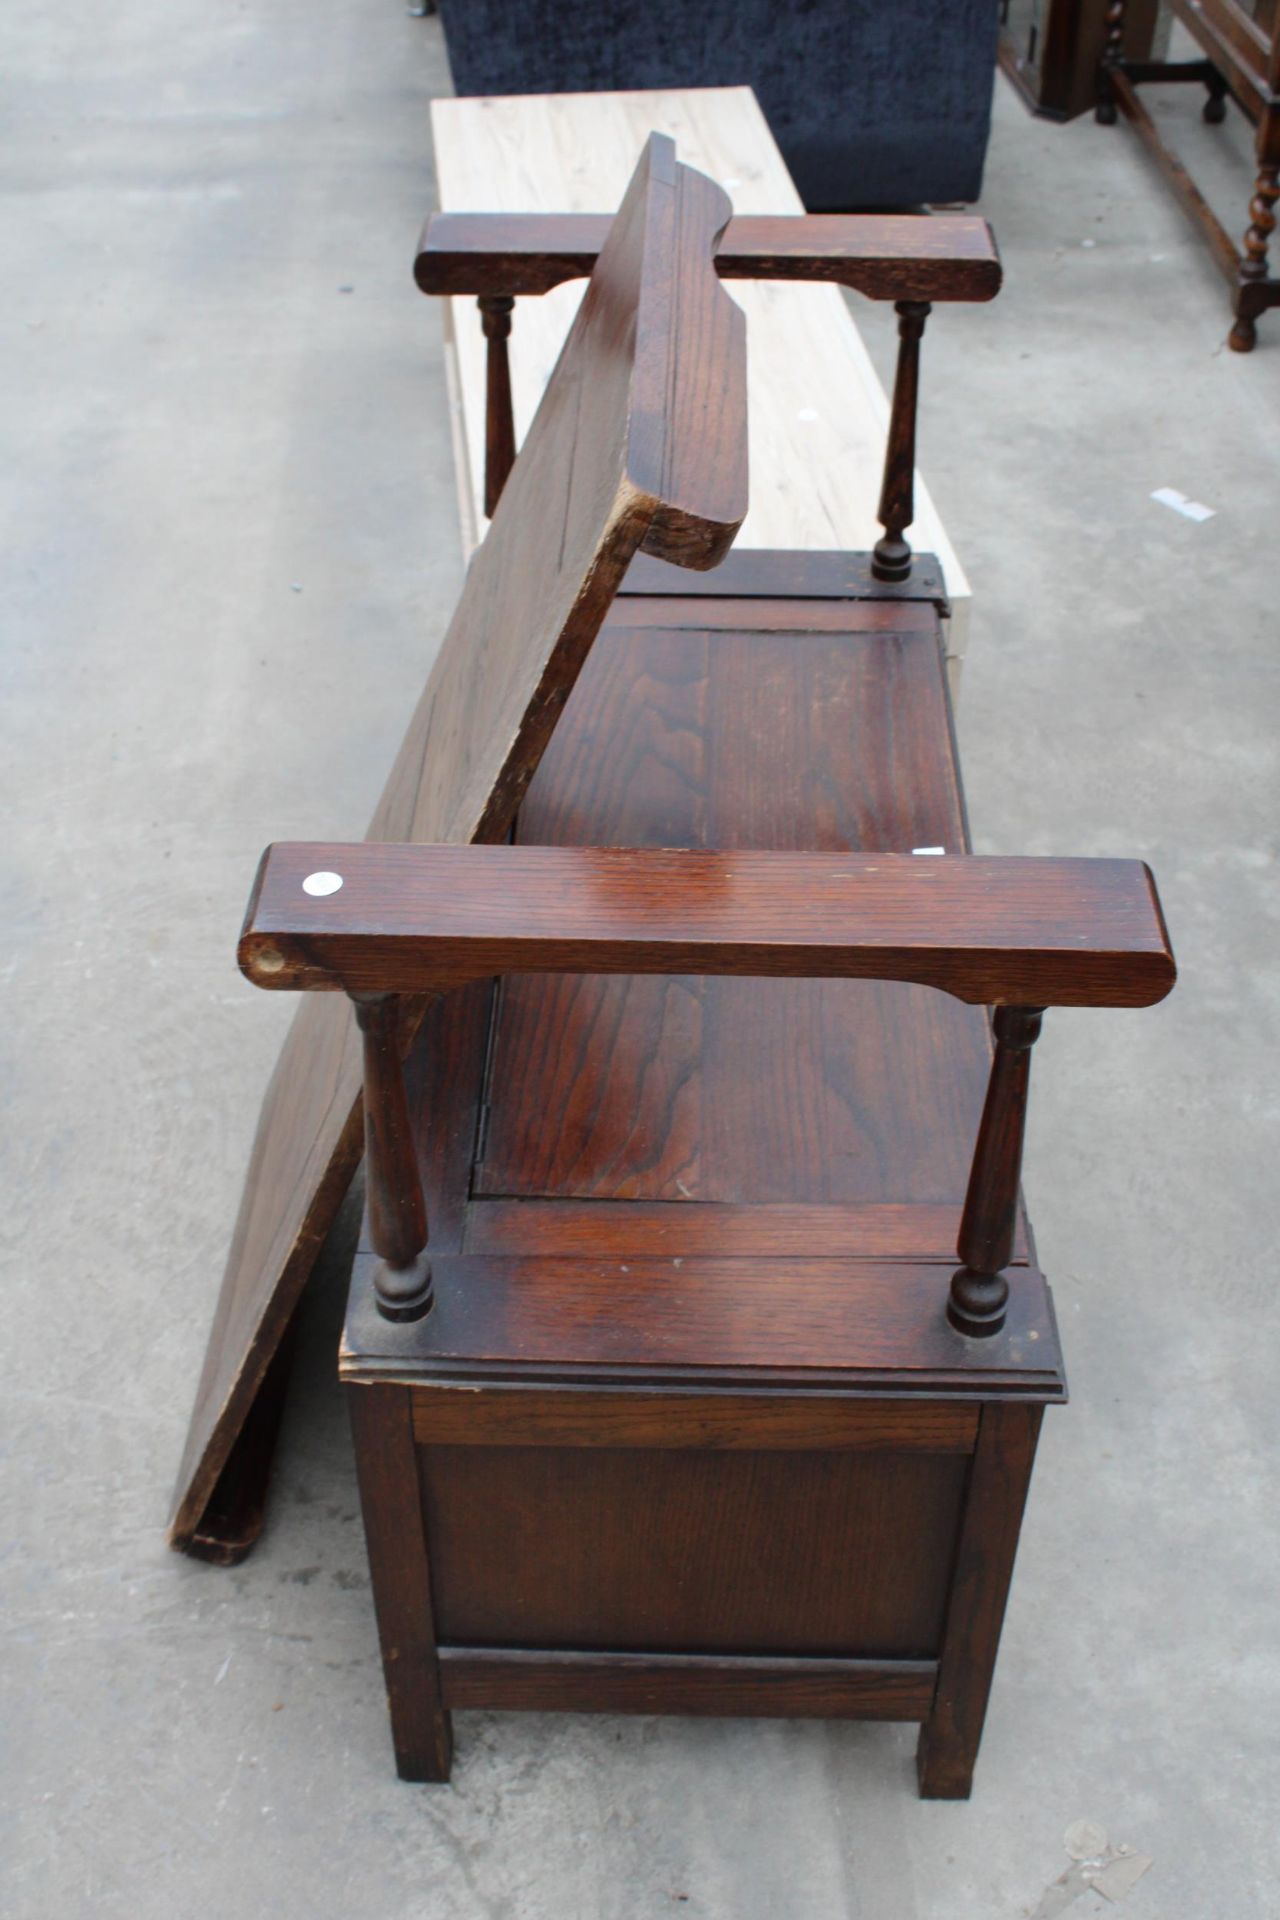 A MID 20TH CENTURY OAK MONKS BENCH - Image 3 of 3